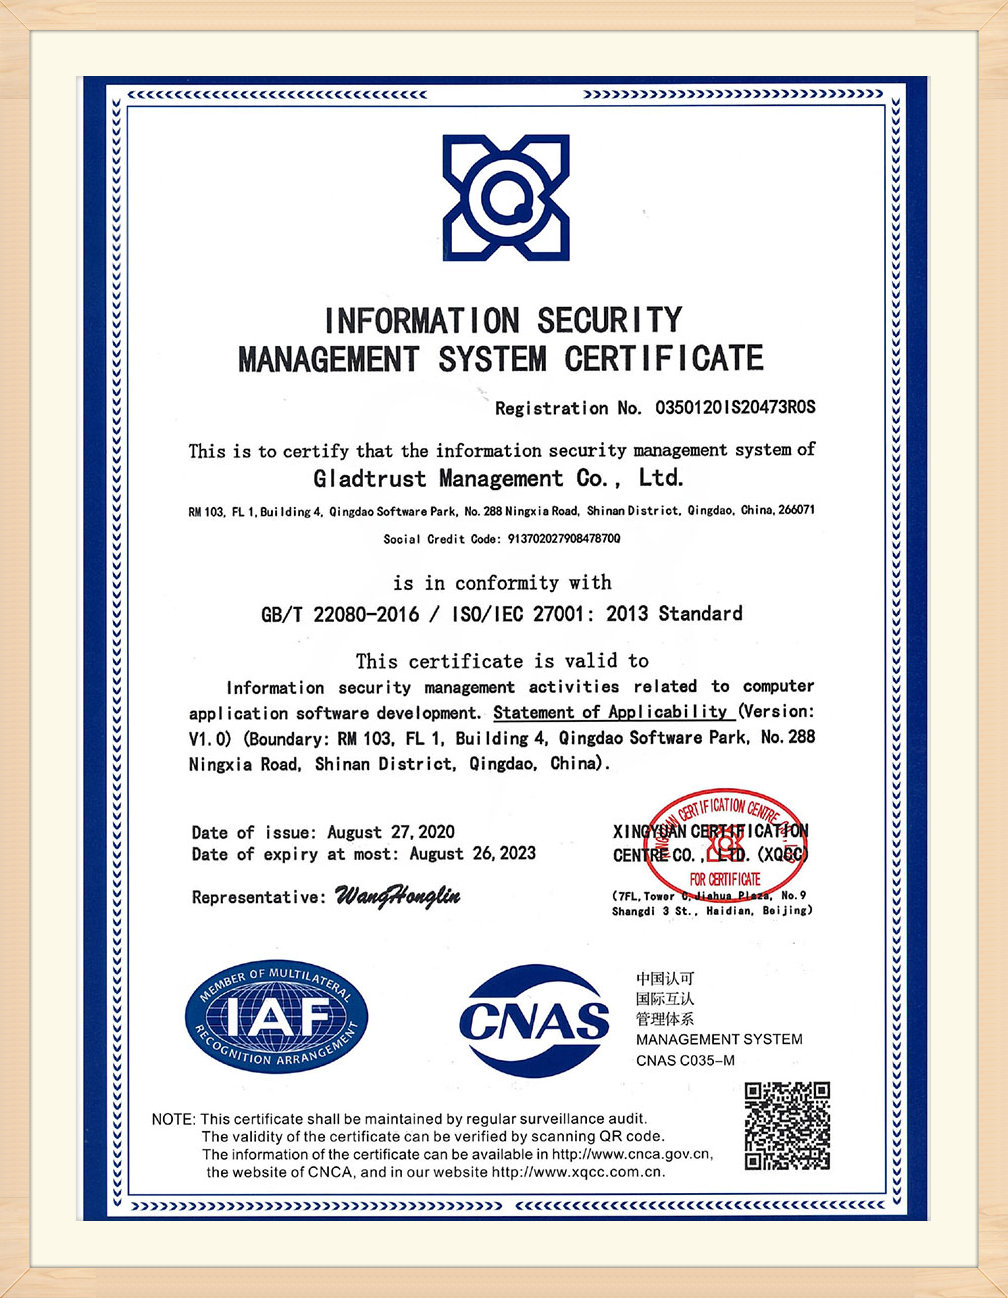 Information Security Management System Certificate